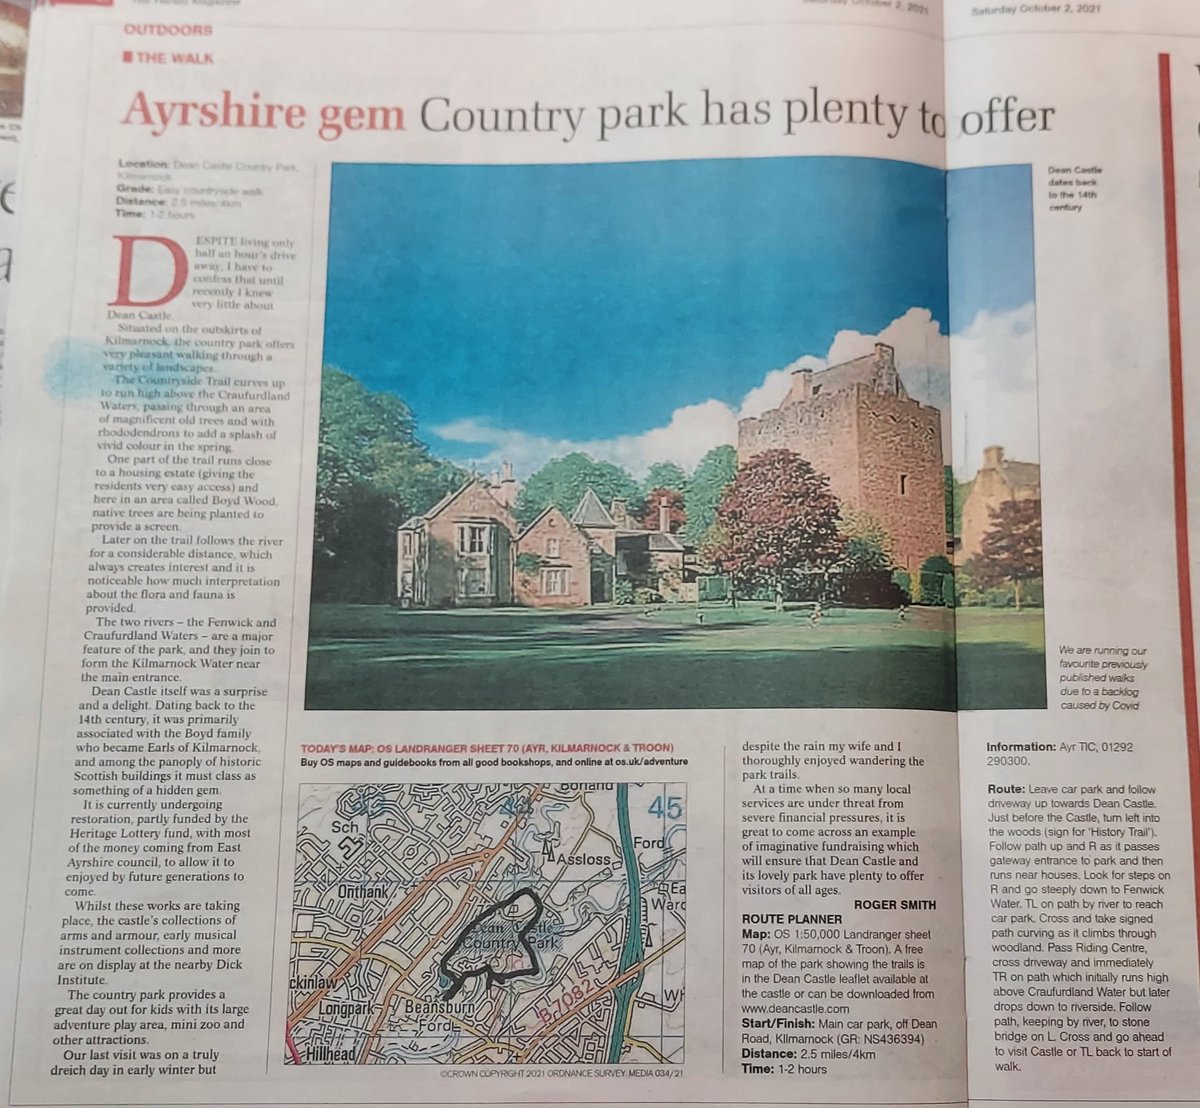 Dean Castle Country Park recognised as an Ayrshire Gem in todays @heraldmagazine